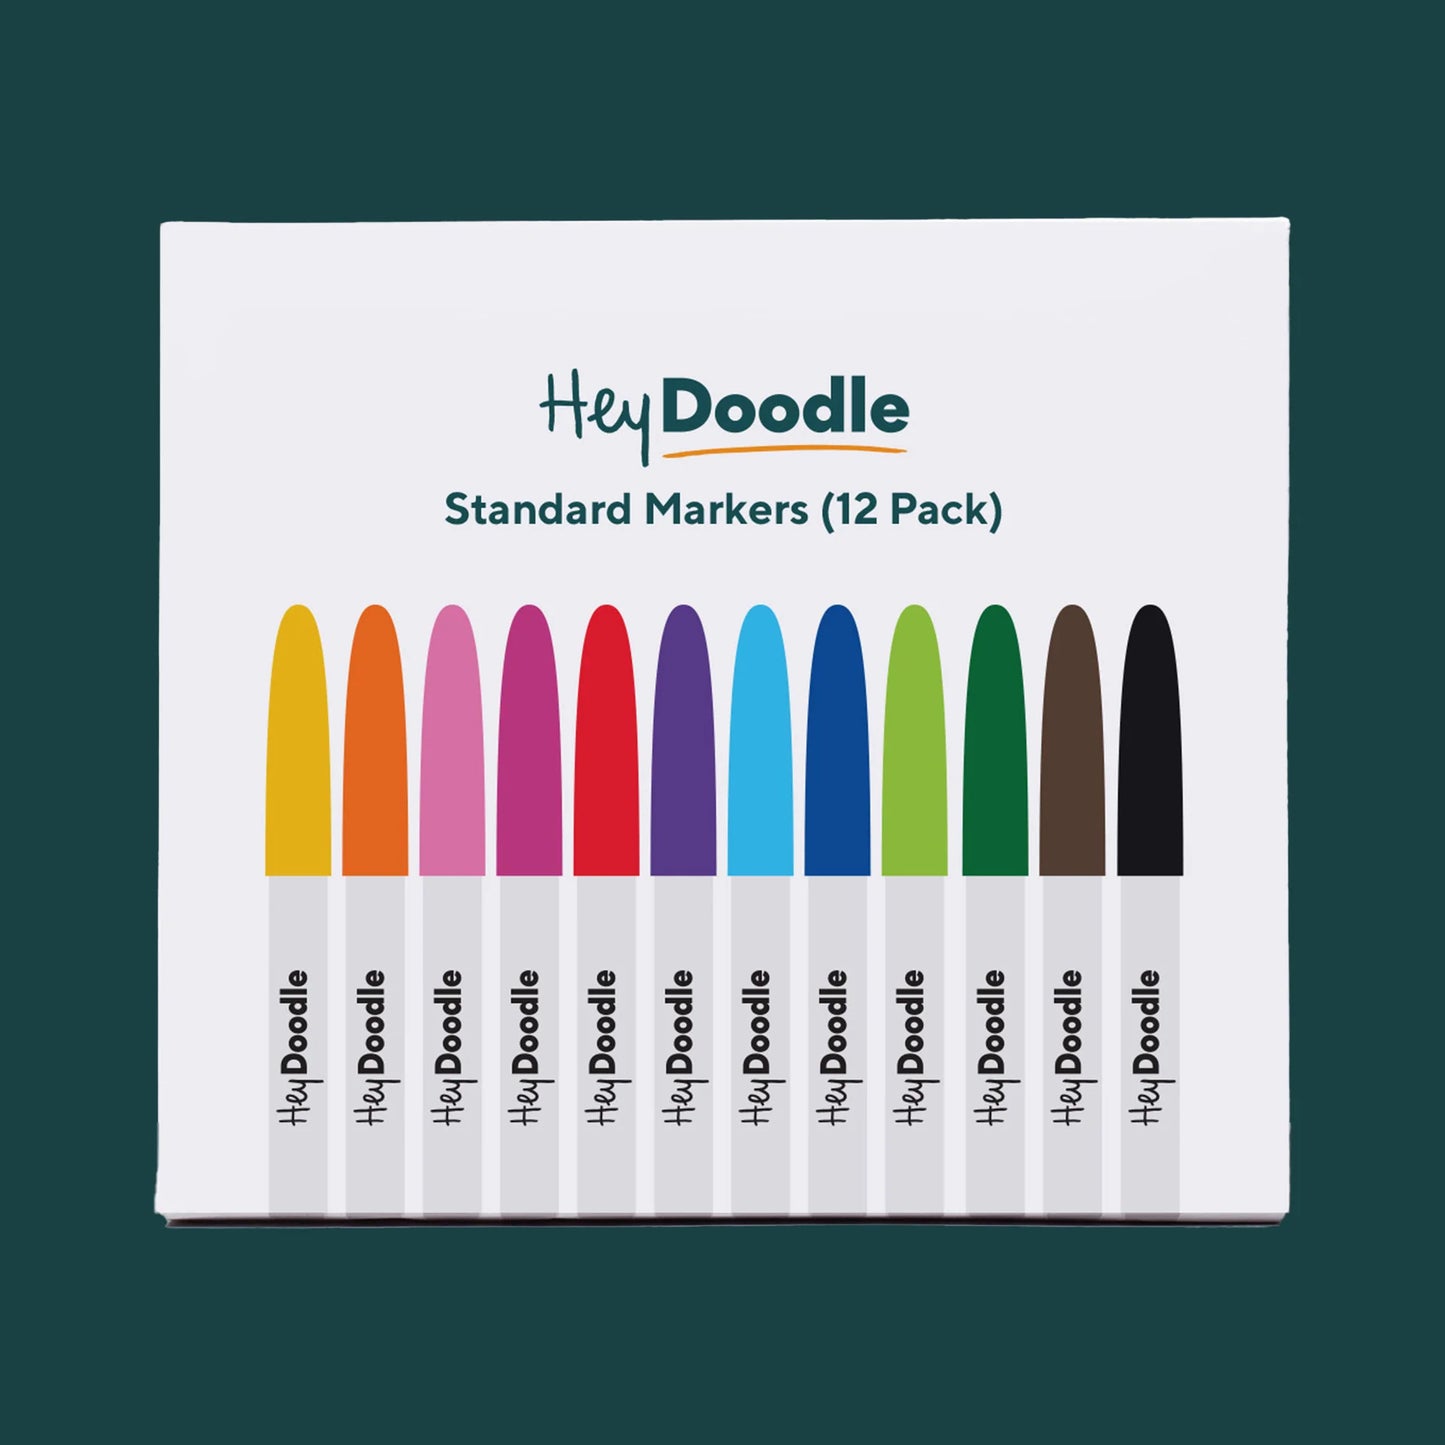 Standard Markers (12 Pack)